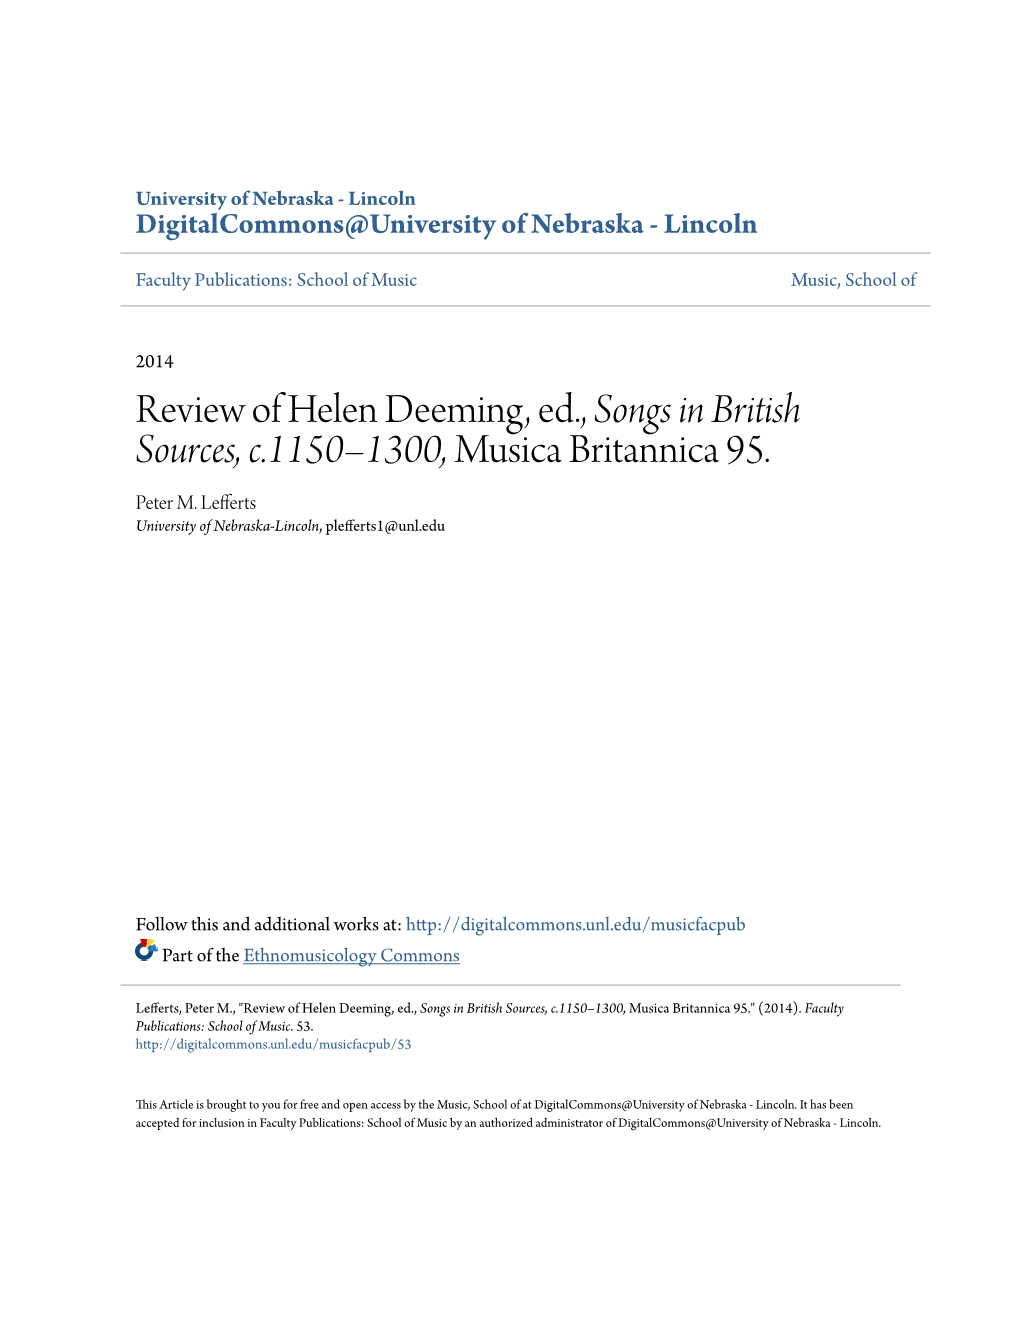 Review of Helen Deeming, Ed., Songs in British Sources, C.1150–1300, Musica Britannica 95